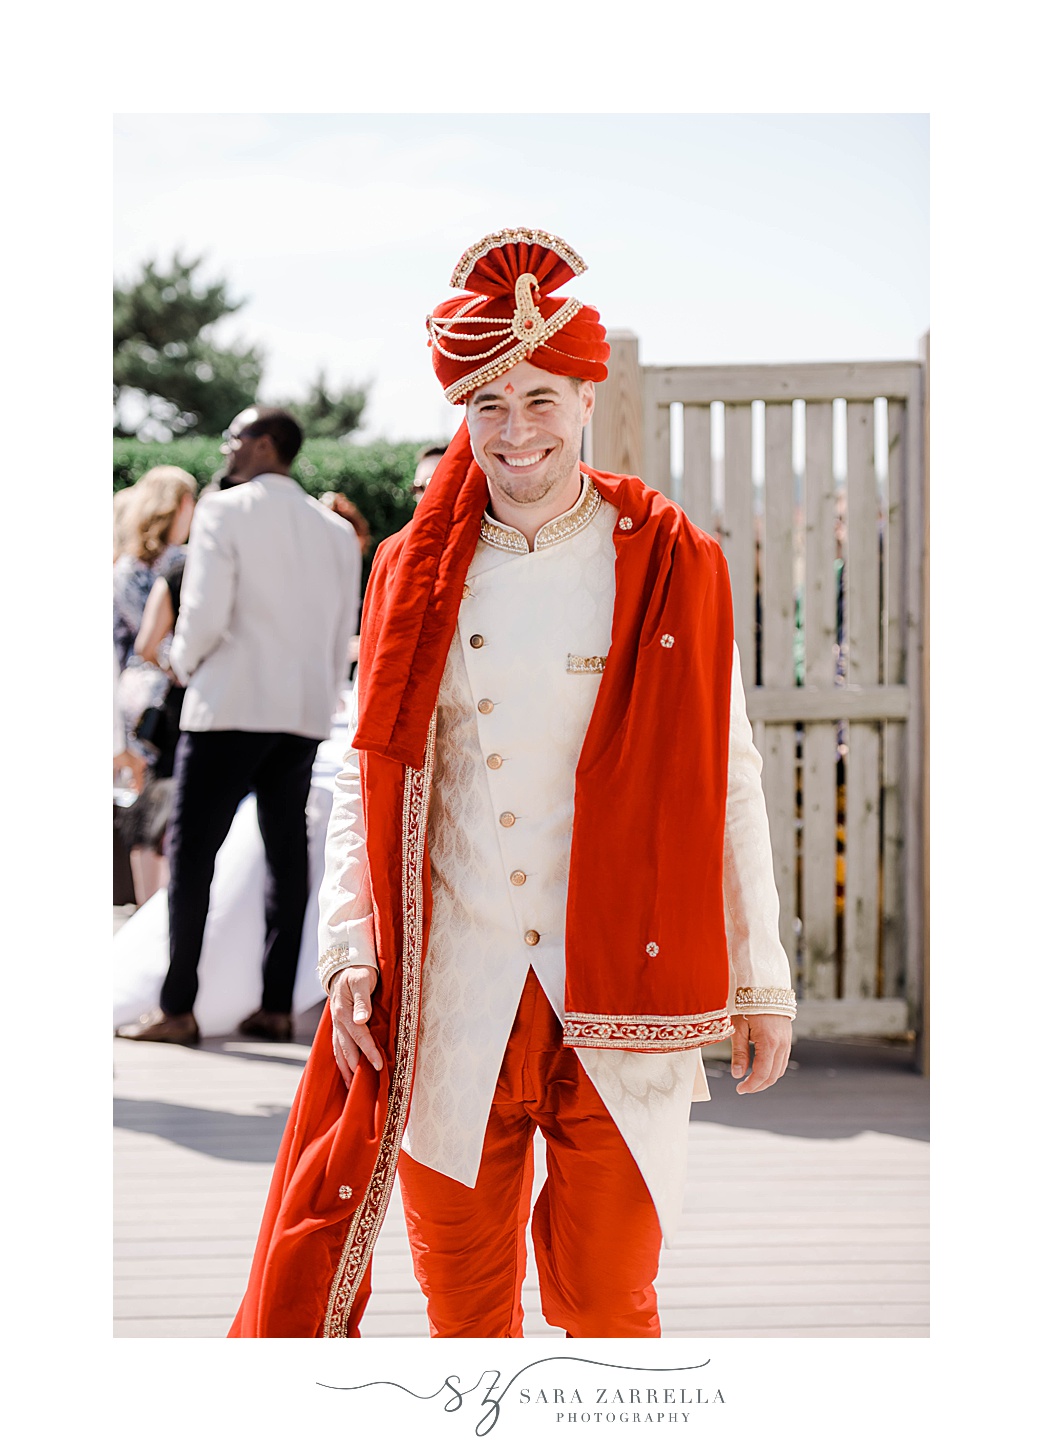 groom in red turban and wrap walks down aisle for traditional Indian wedding ceremony at Newport Beach House